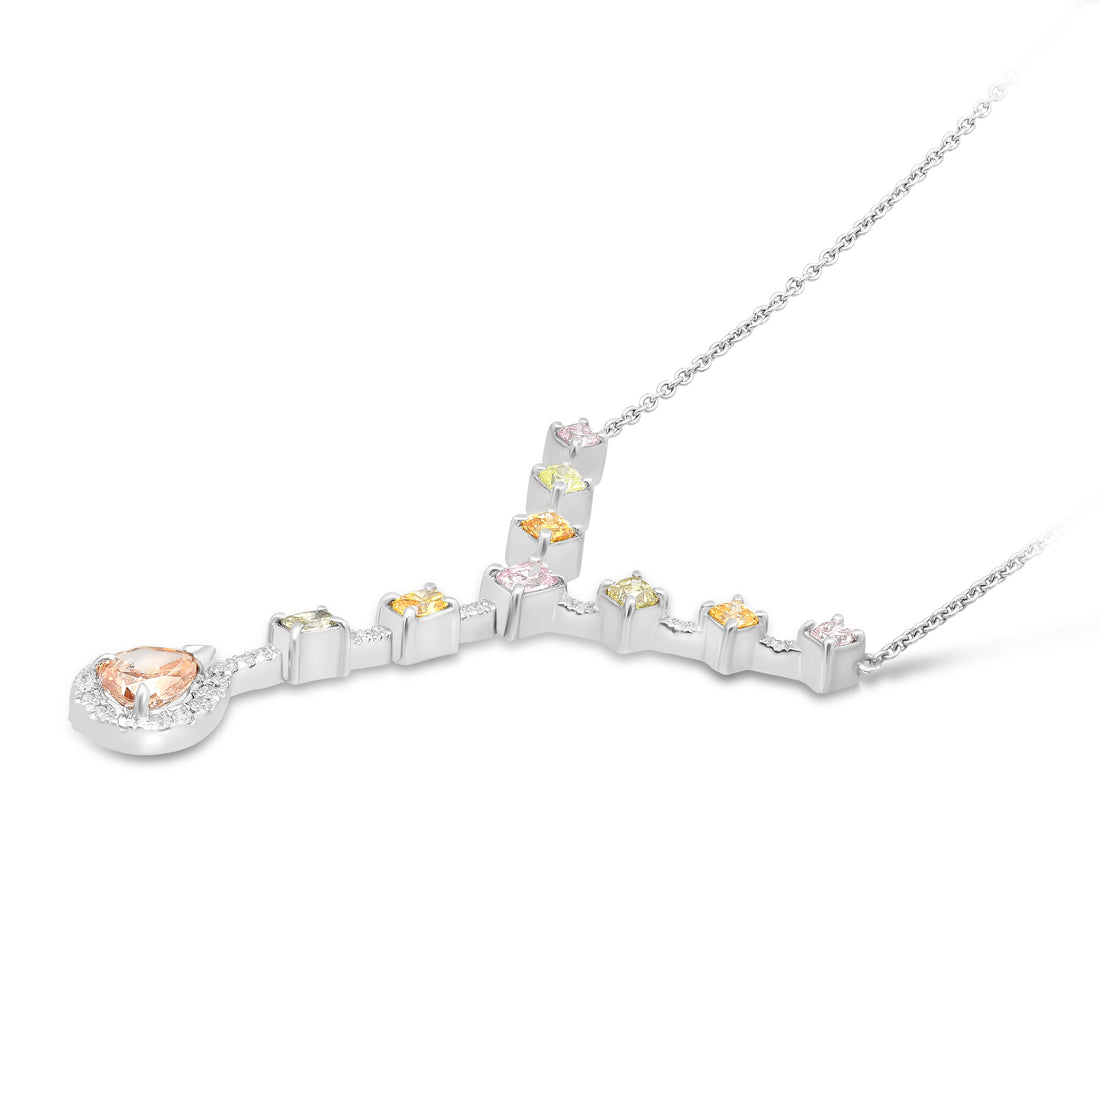 Mixed Fancy Colored Diamond Necklace - 1.57 Carat